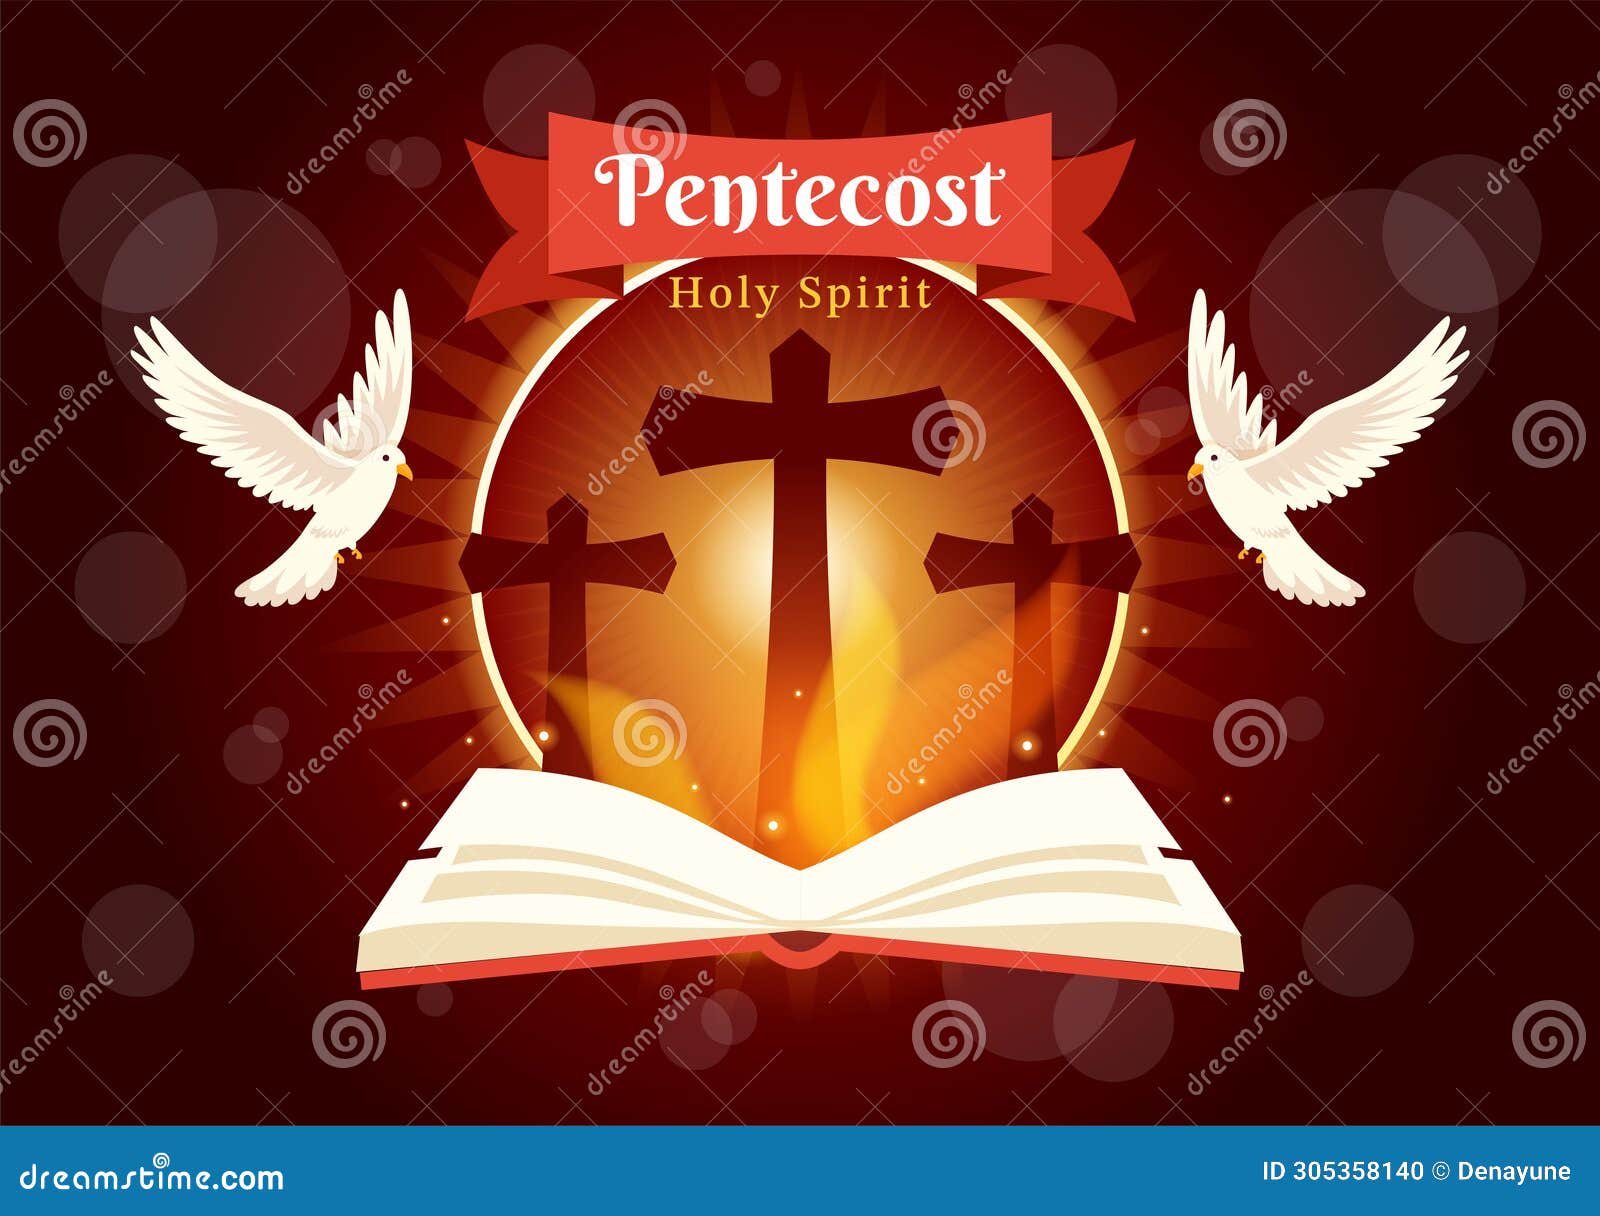 pentecost sunday   with flame and holy spirit dove in catholics or christians religious culture holiday